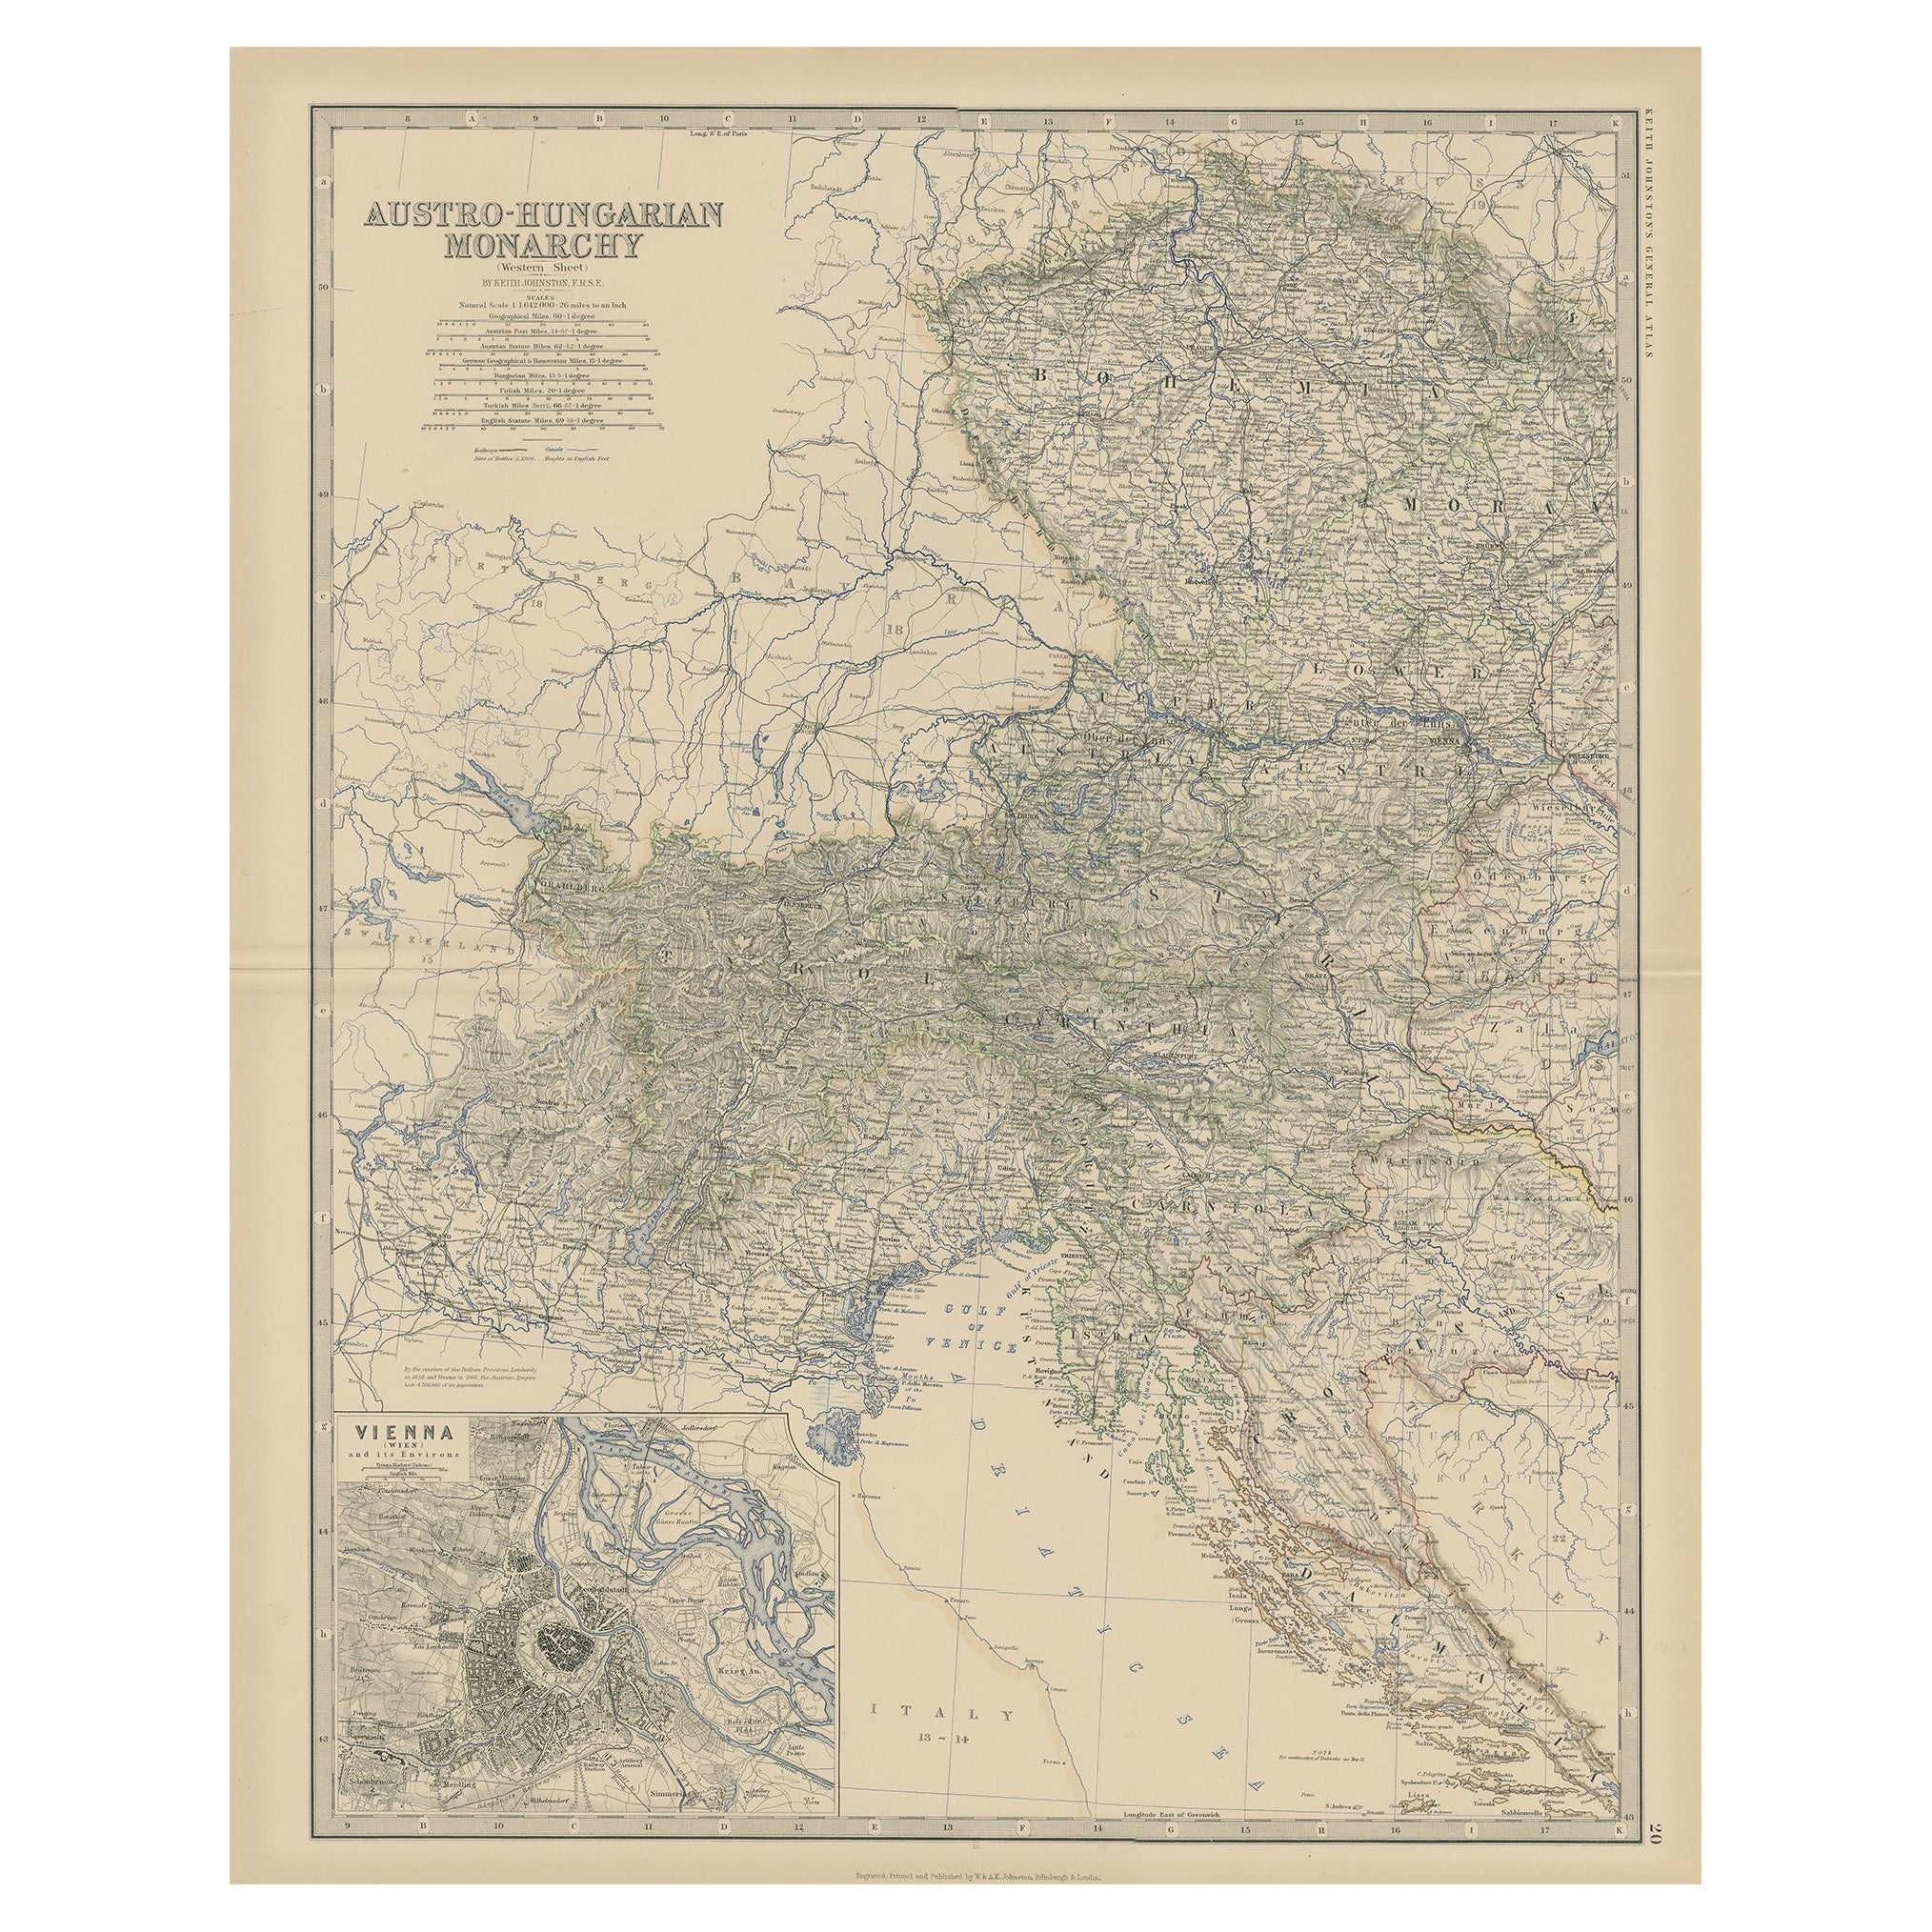 Old Map of the Austro-Hungarian Monarchy with an Inset of Vienna, 1882